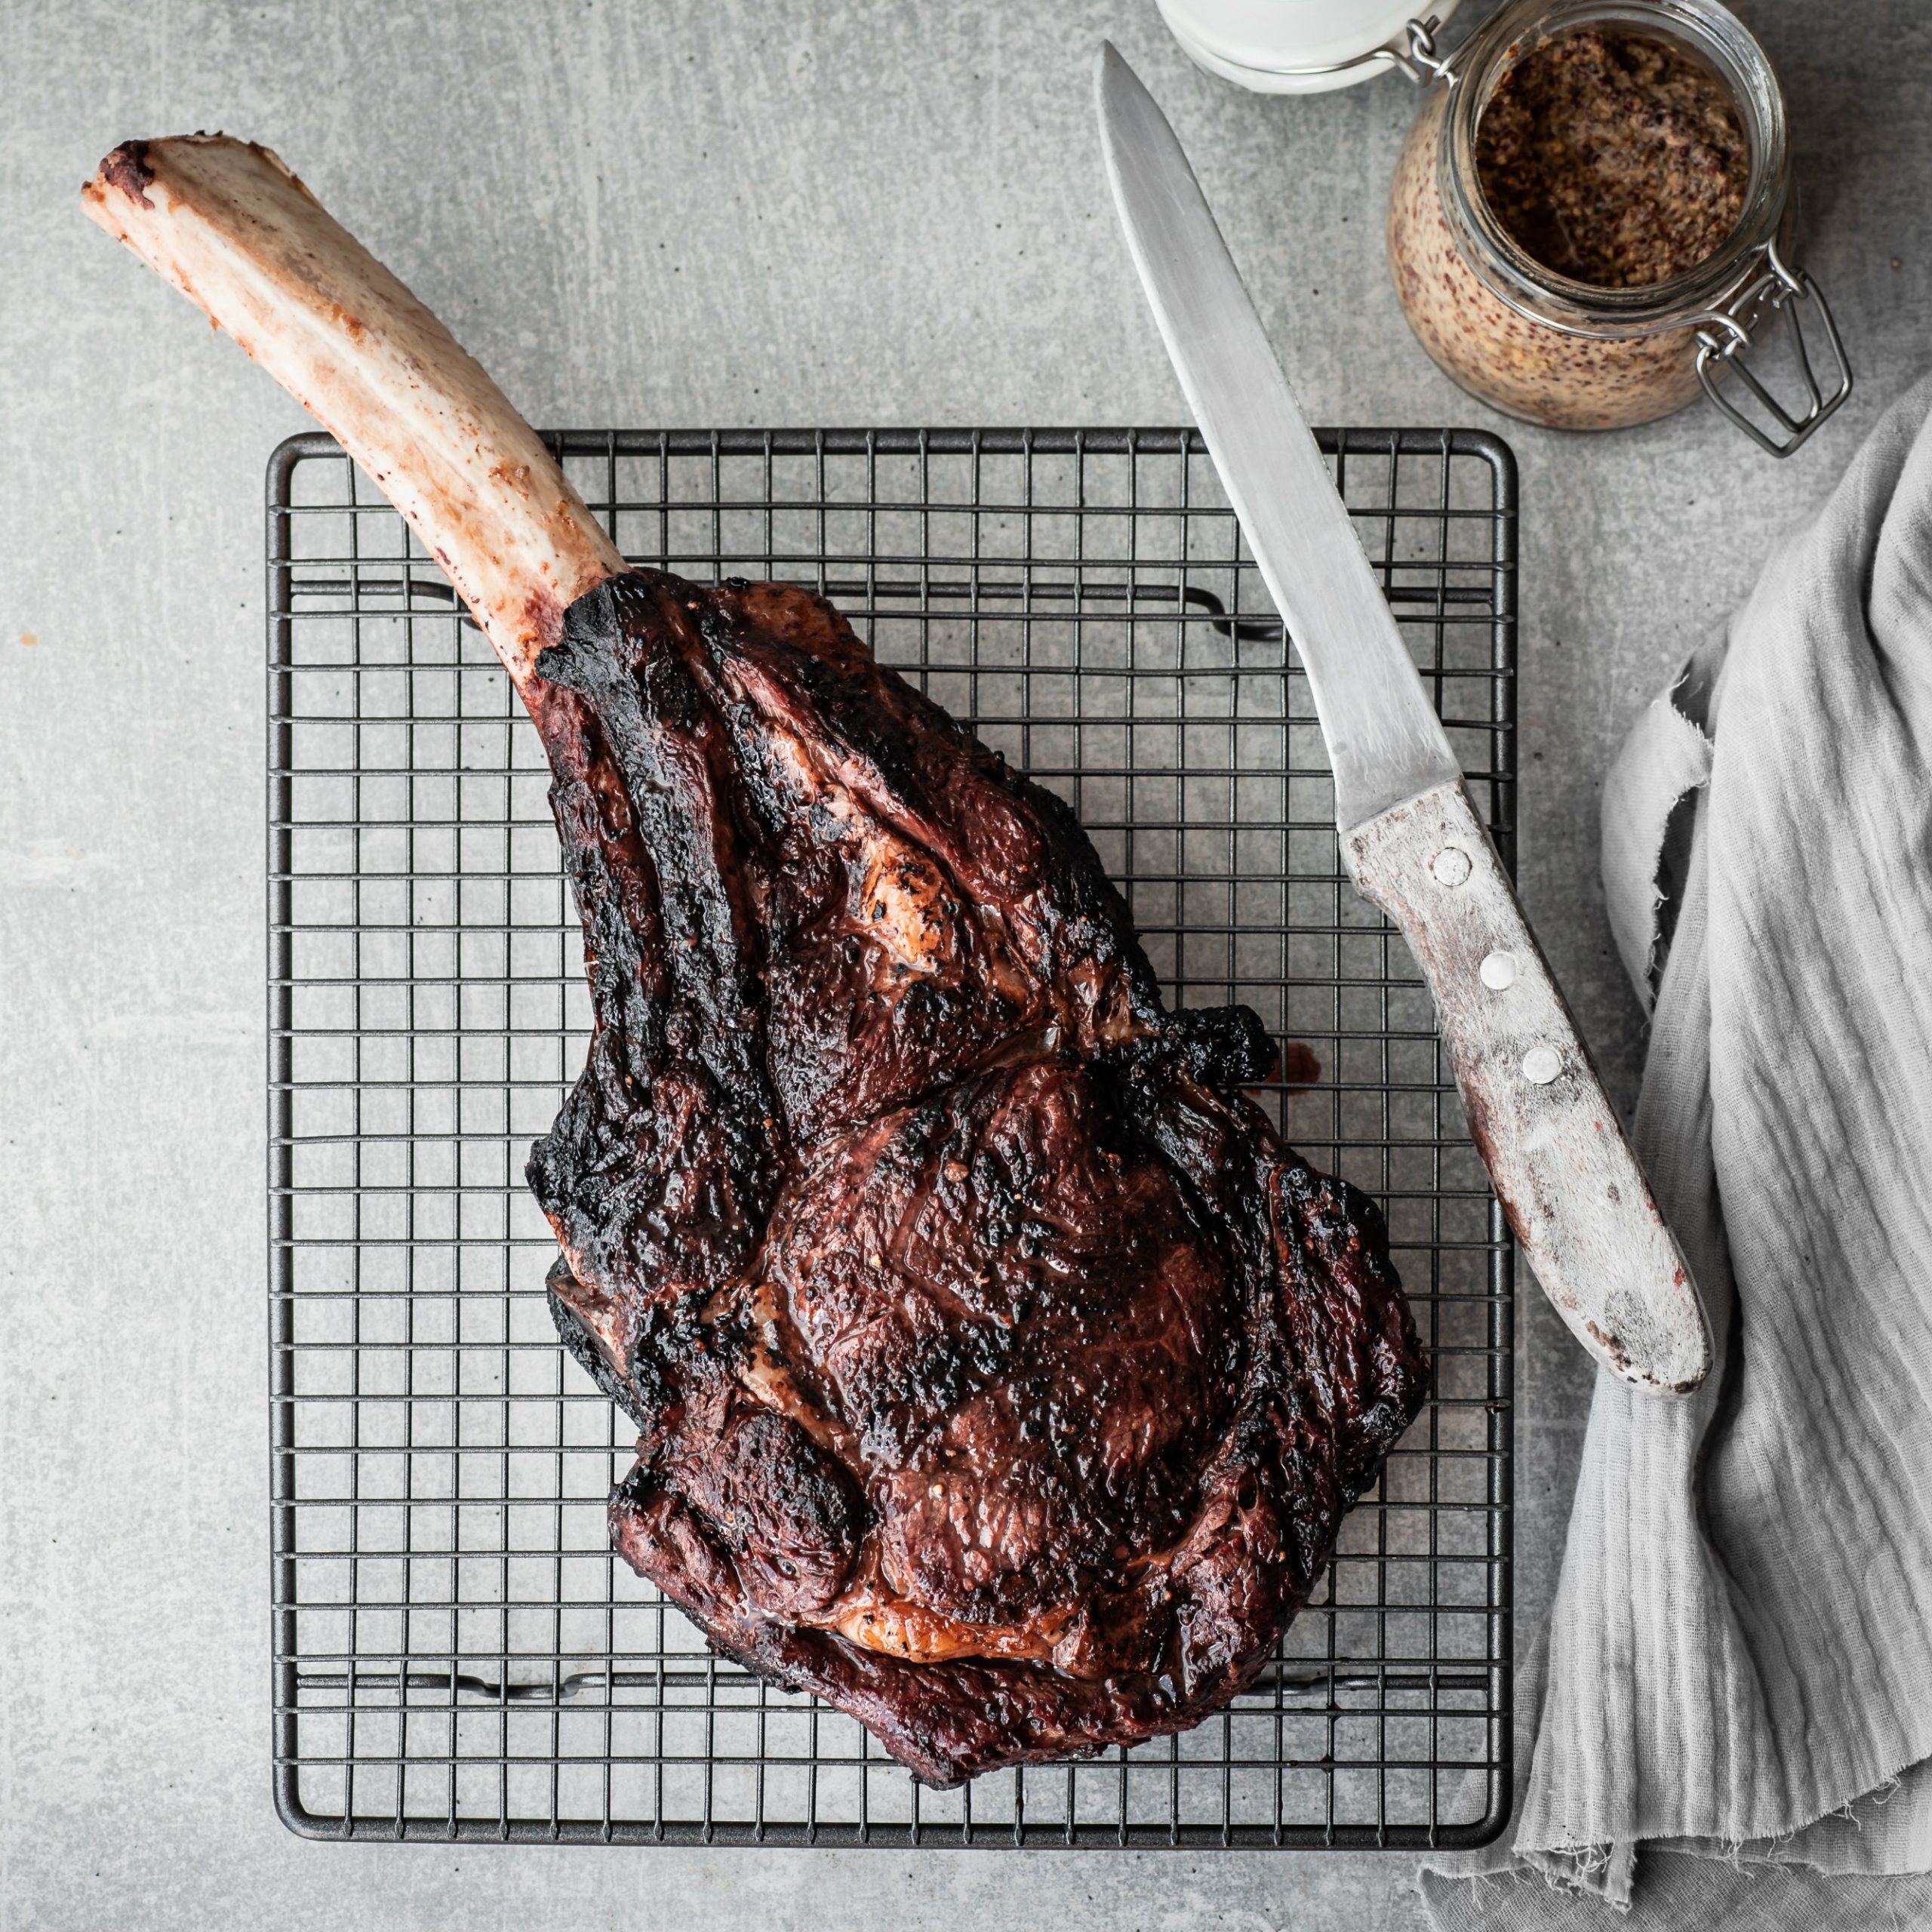 Ho To Cook Tomahawk Steak on the Barbecue